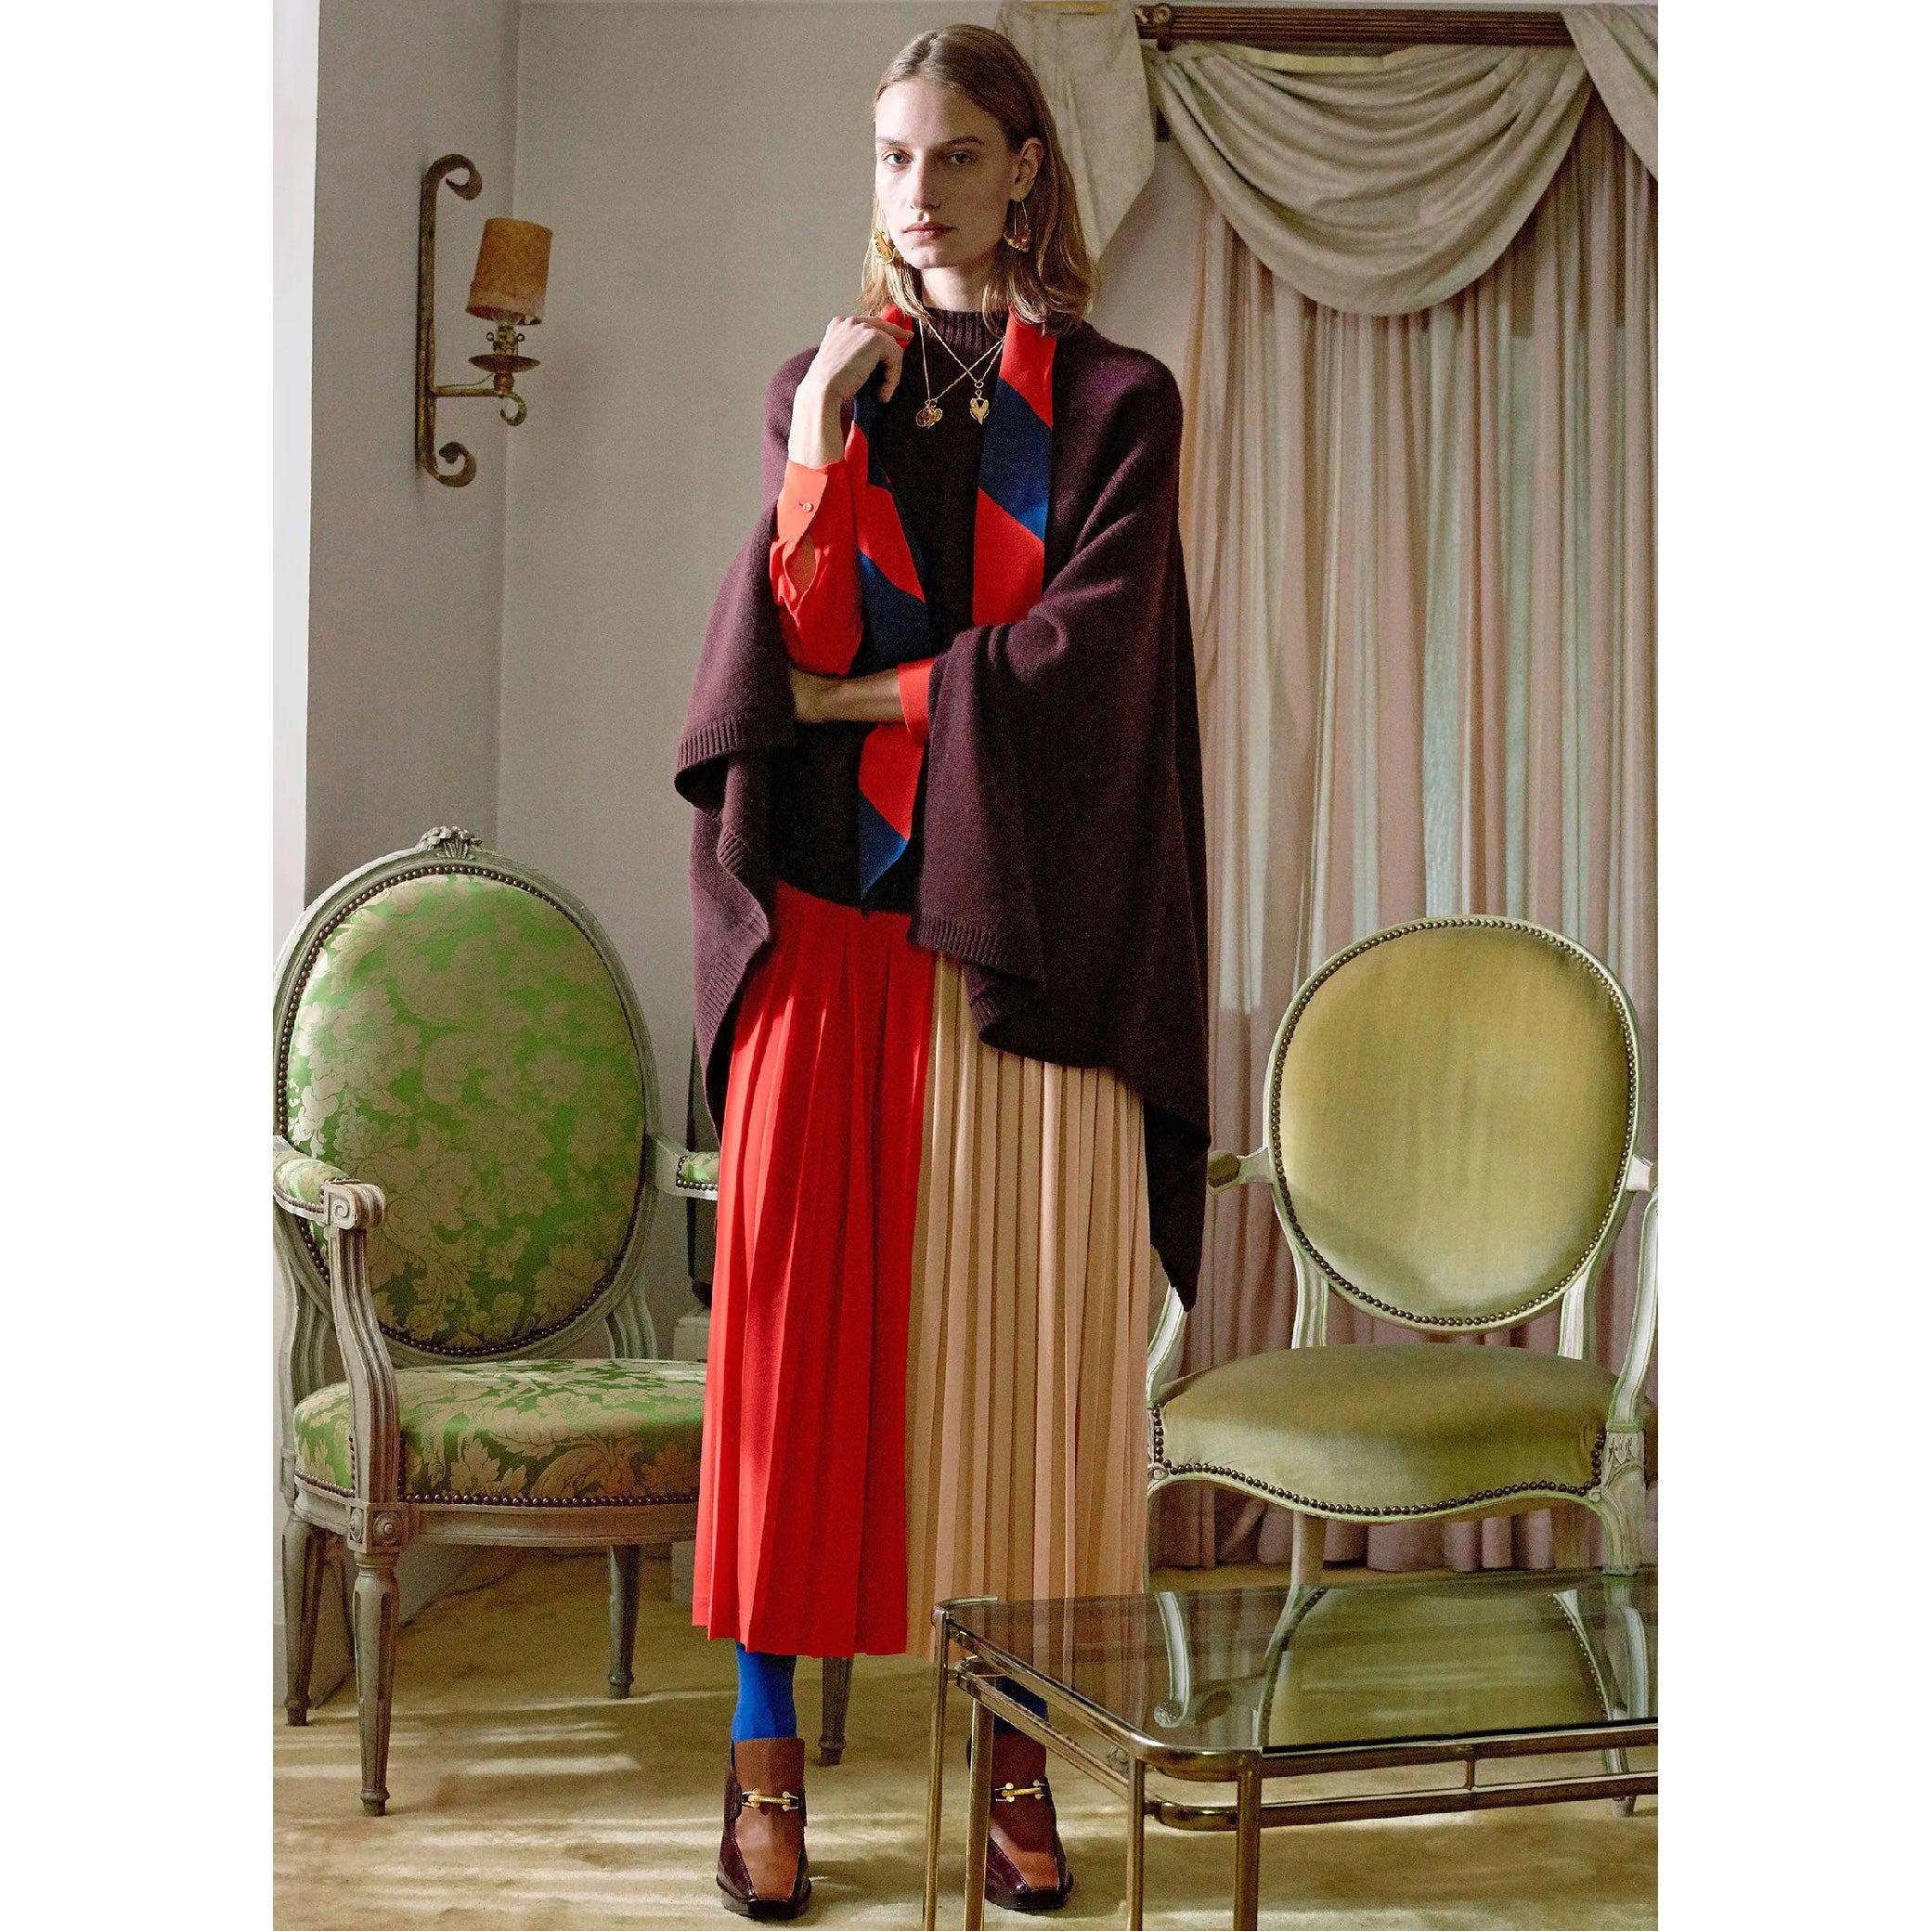 GIVENCHY Pre-Fall 2018 midi skirt by Clare Waight Keller comes in a red & pink two-toned viscose / polyester with a leather waistband featuring a pleated design, mid-length, and a side zipper closure. Made in Italy.
Excellent Pre-Owned Condition.